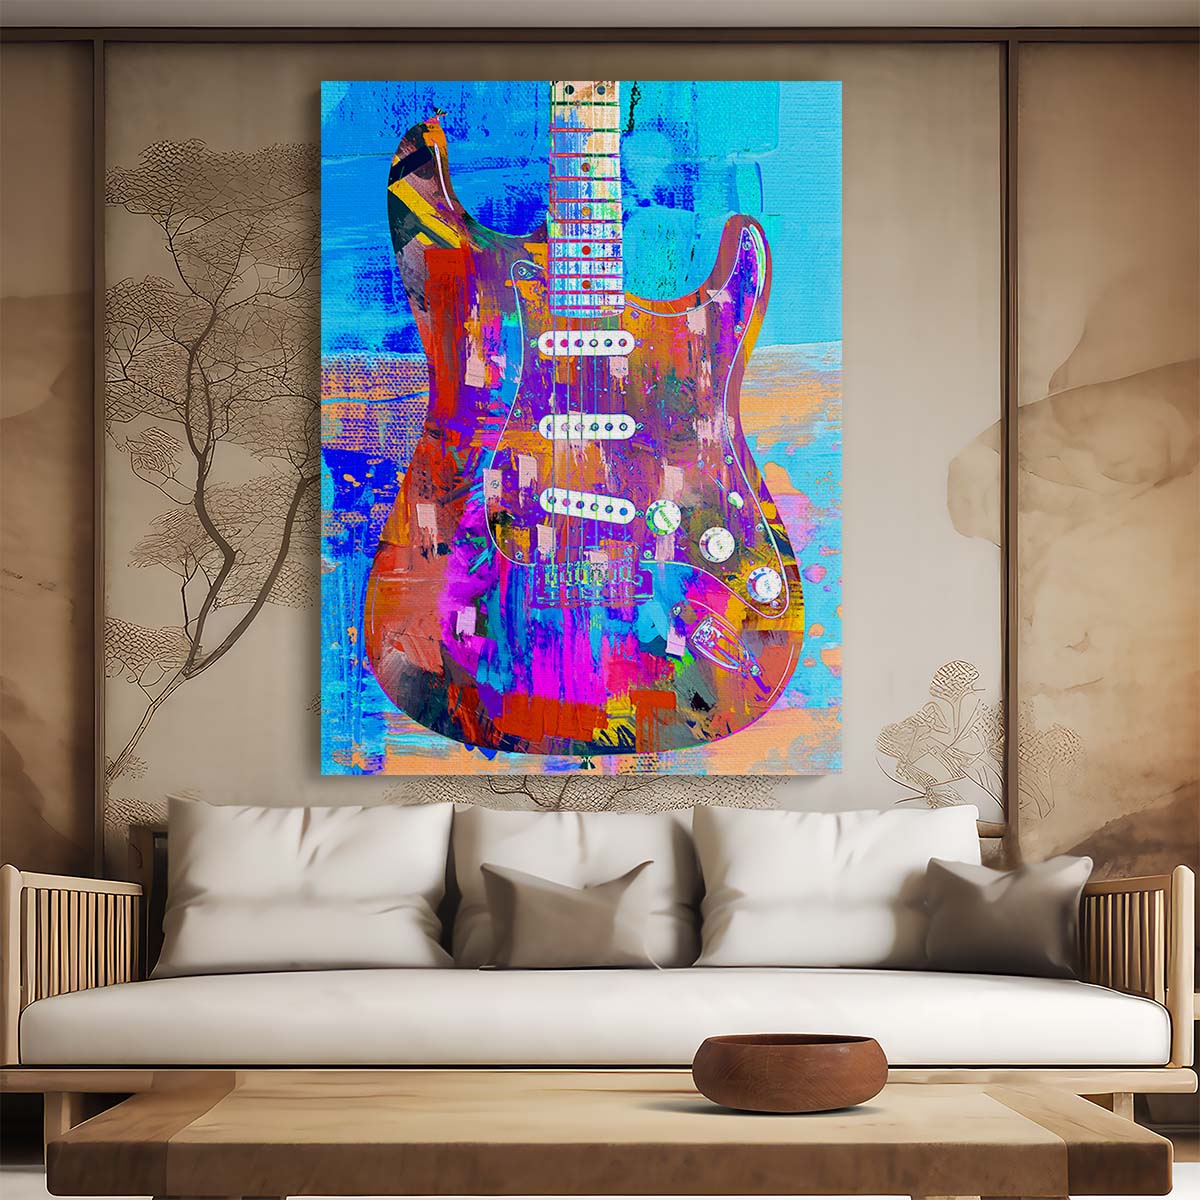 Painted Stratocaster Electric Guitar Wall Art by Luxuriance Designs. Made in USA.